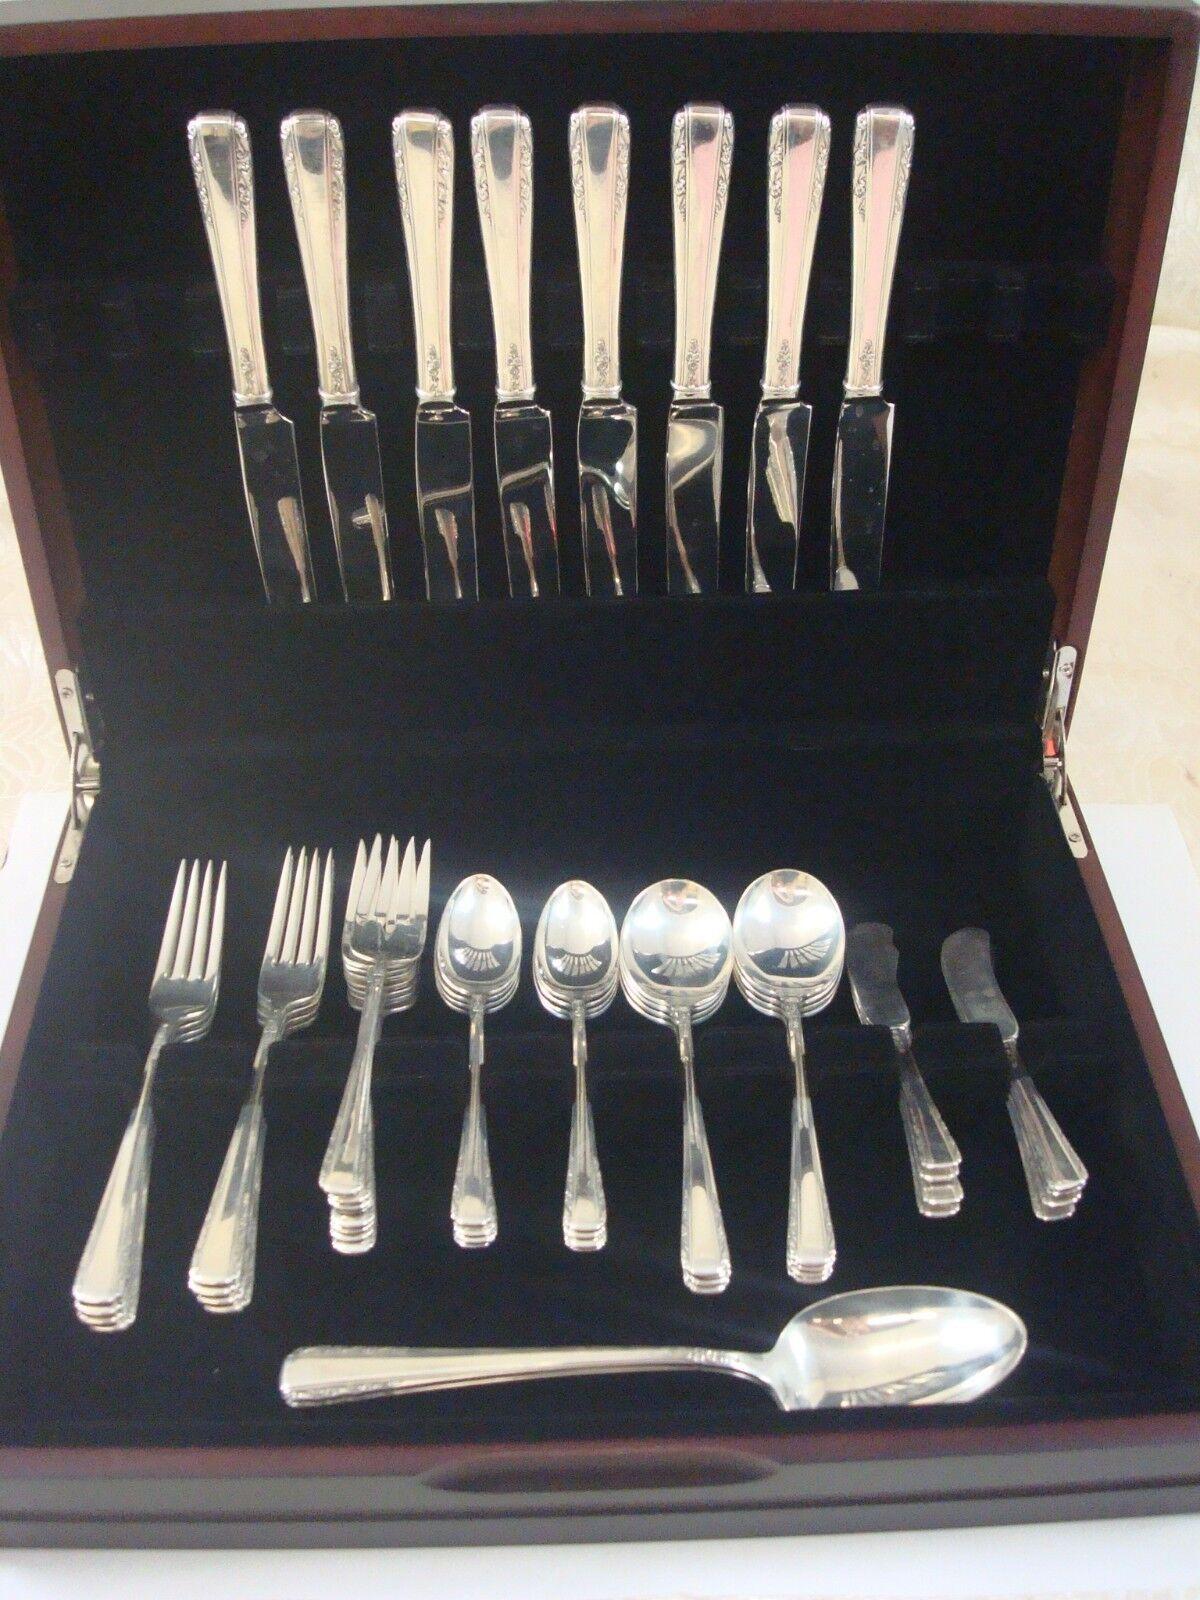 COURTSHIP BY INTERNATIONAL sterling silver Flatware set - 50 Pieces. This set includes:

8 KNIVES, 9 1/8